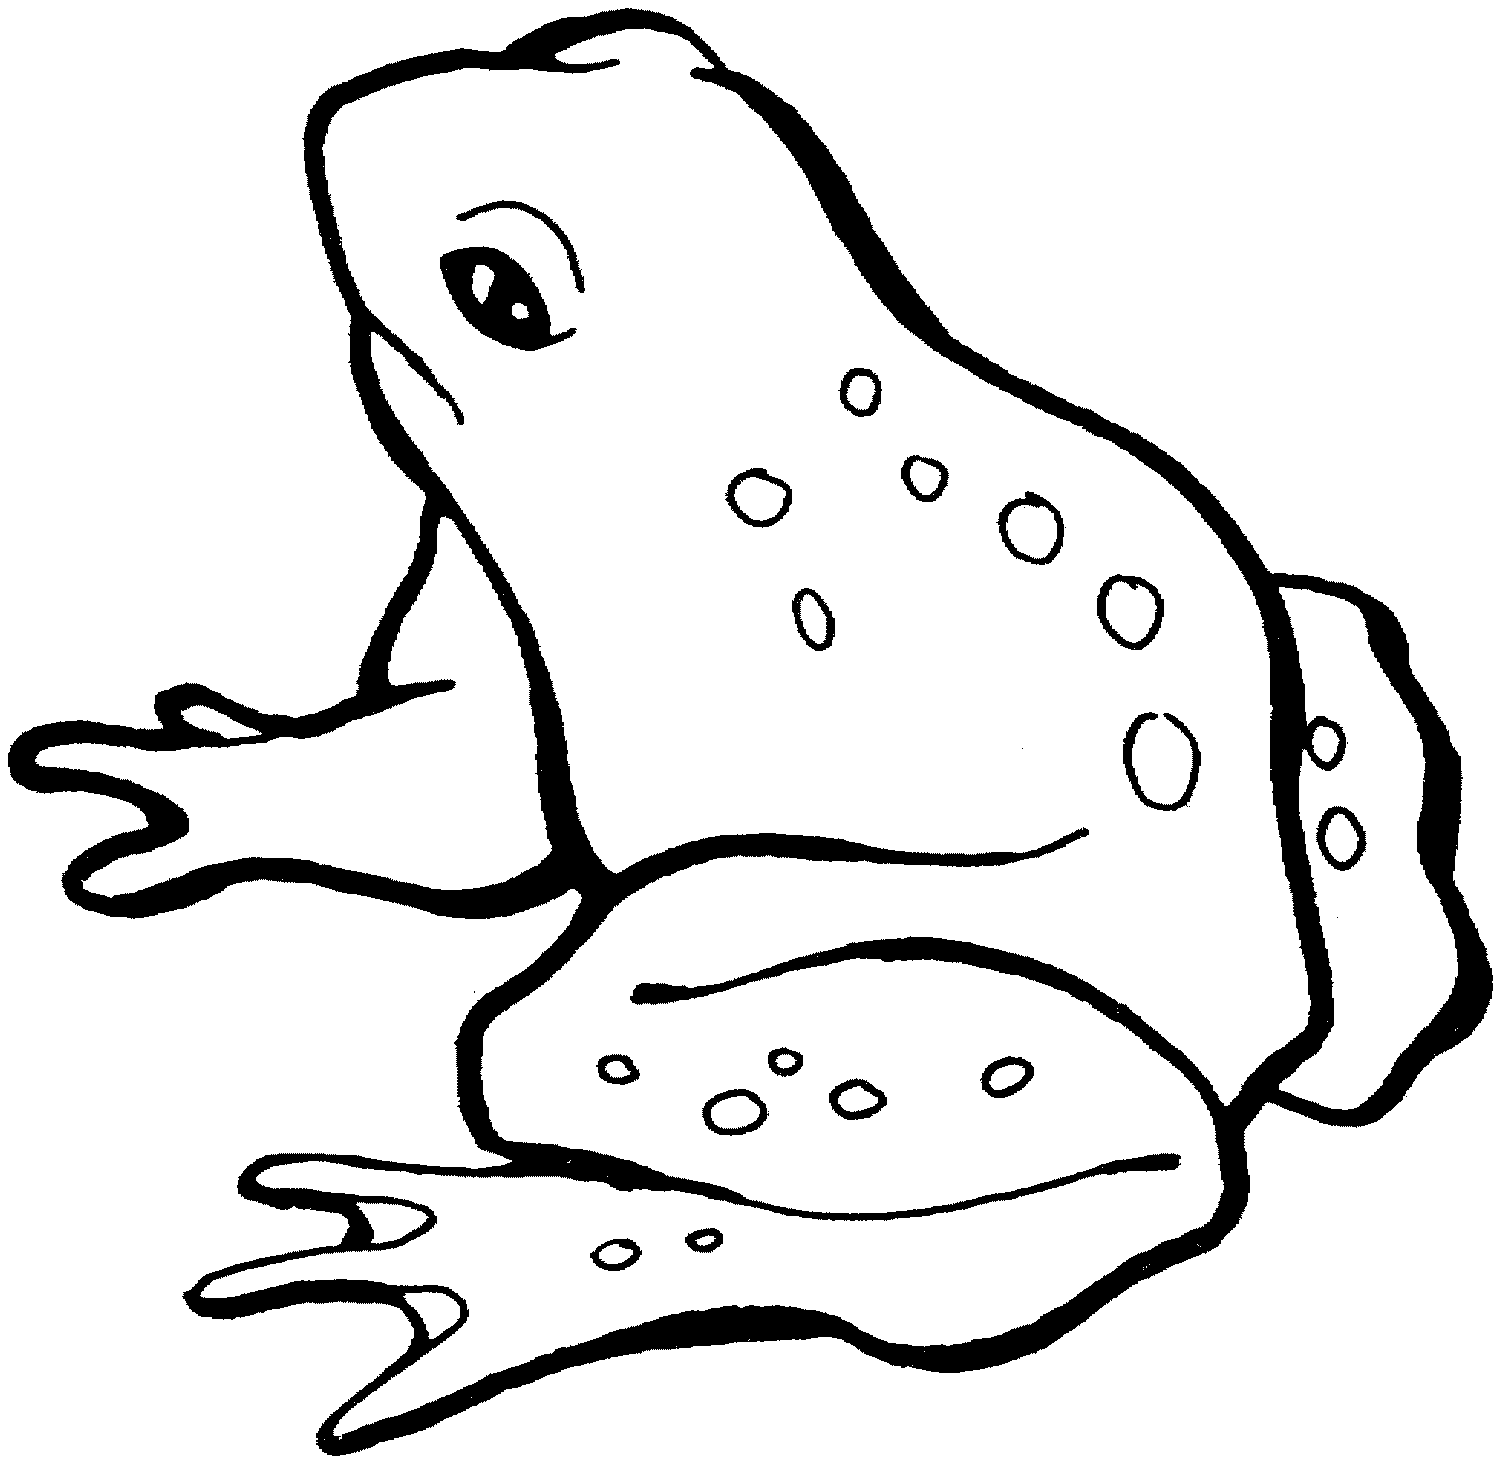 Free Frog Clip Art Black And White Frog Black And White Leaves - Tree Frog Black And White, Transparent background PNG HD thumbnail